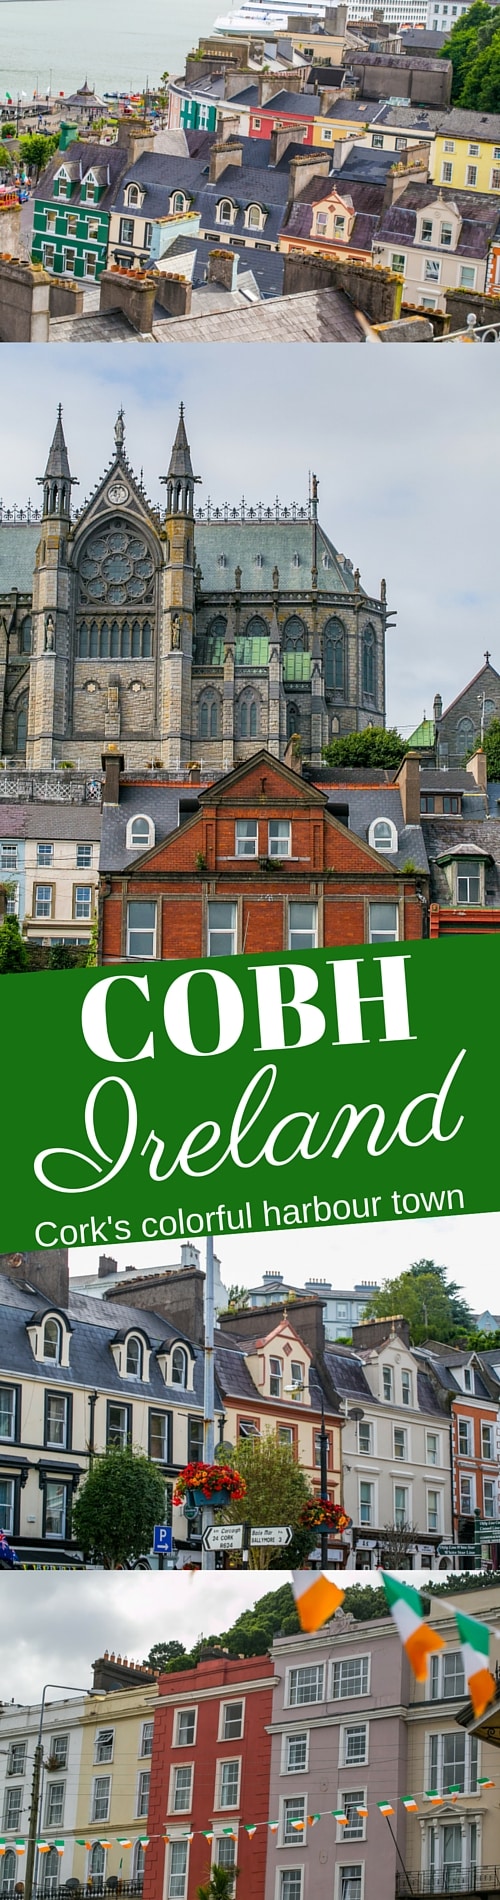 Cobh, County Cork, Ireland - I love this gorgeous seaside harbour town and all its bright colorful buildings! 